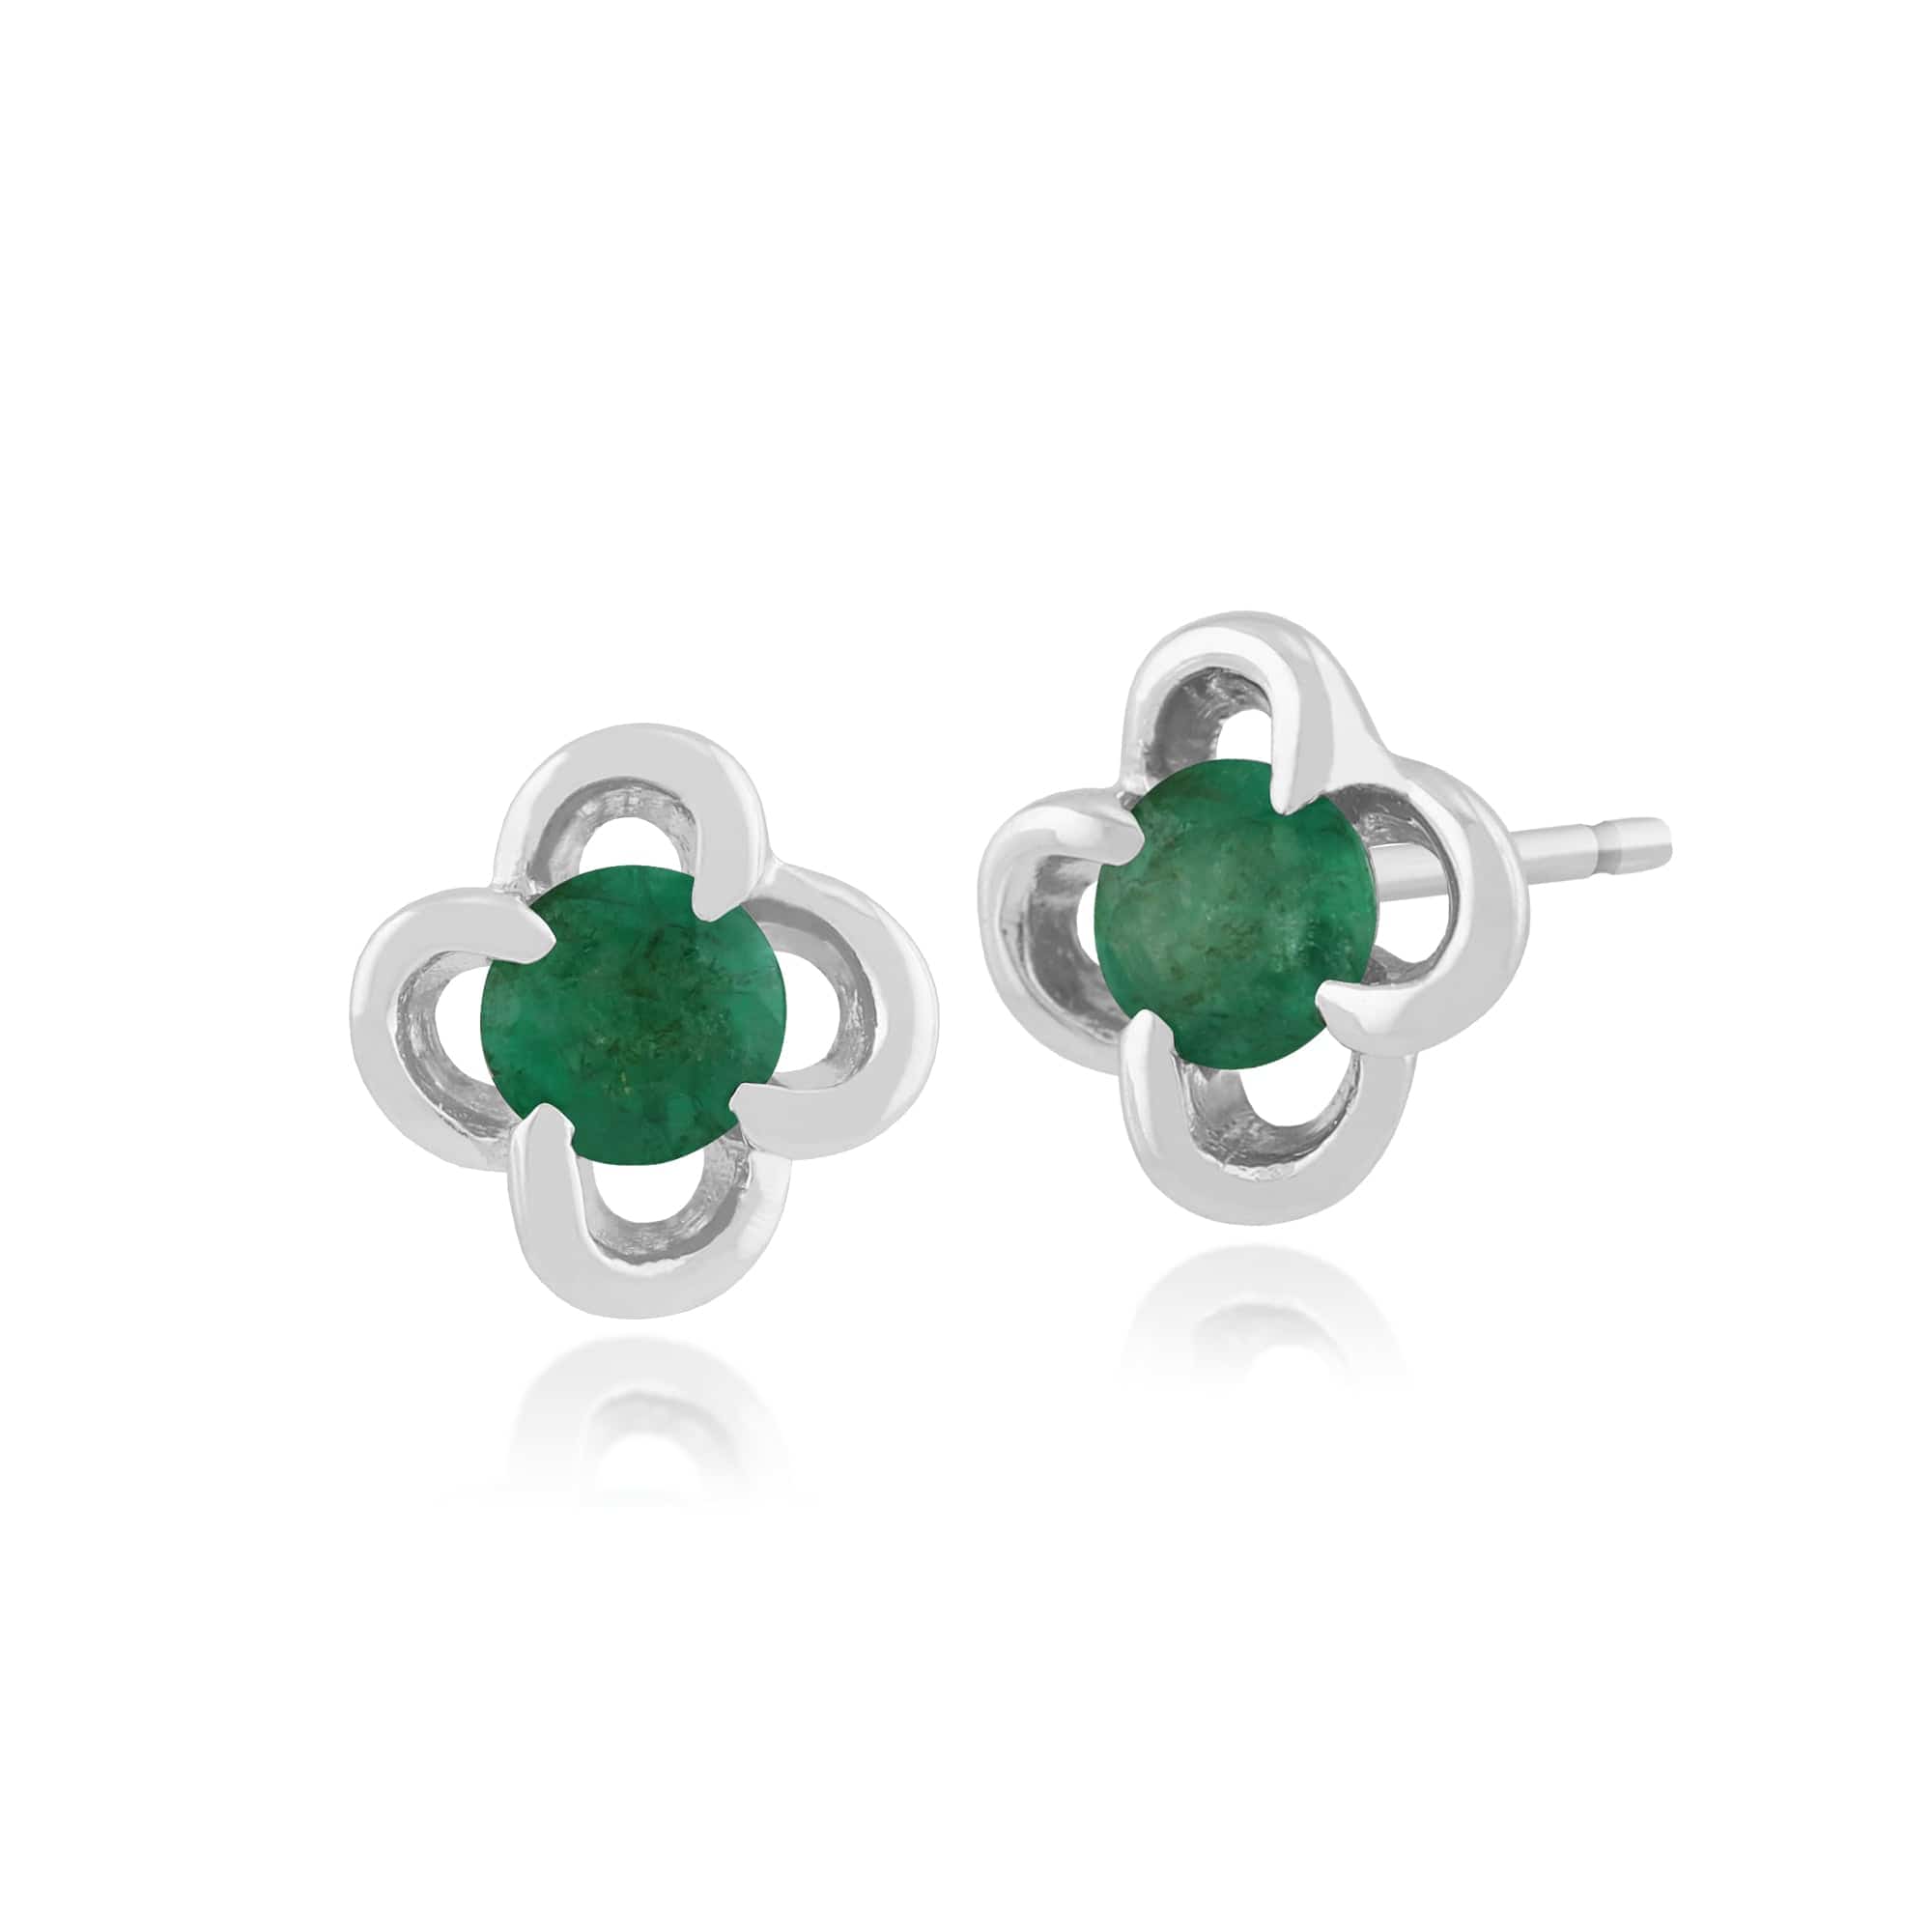 Floral Round Emerald & Diamond Halo Stud Earrings in 9ct White Gold - Gemondo